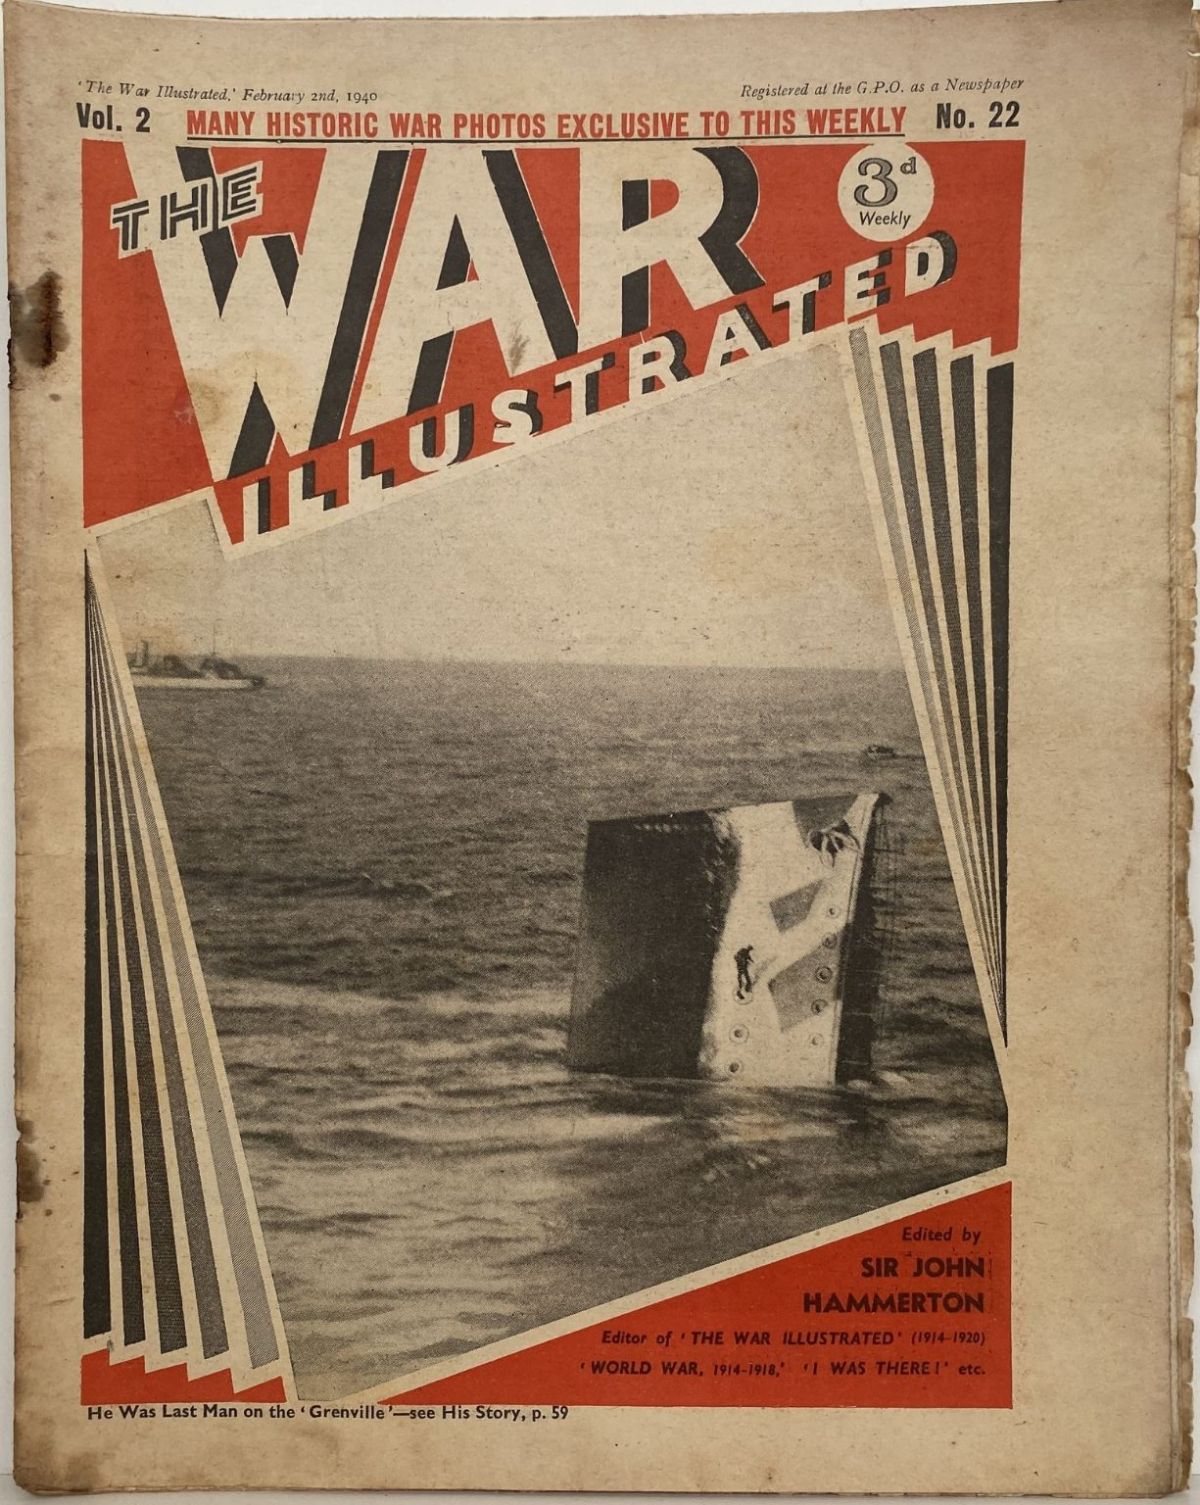 THE WAR ILLUSTRATED - Vol 2, No 22, 2nd Feb 1940